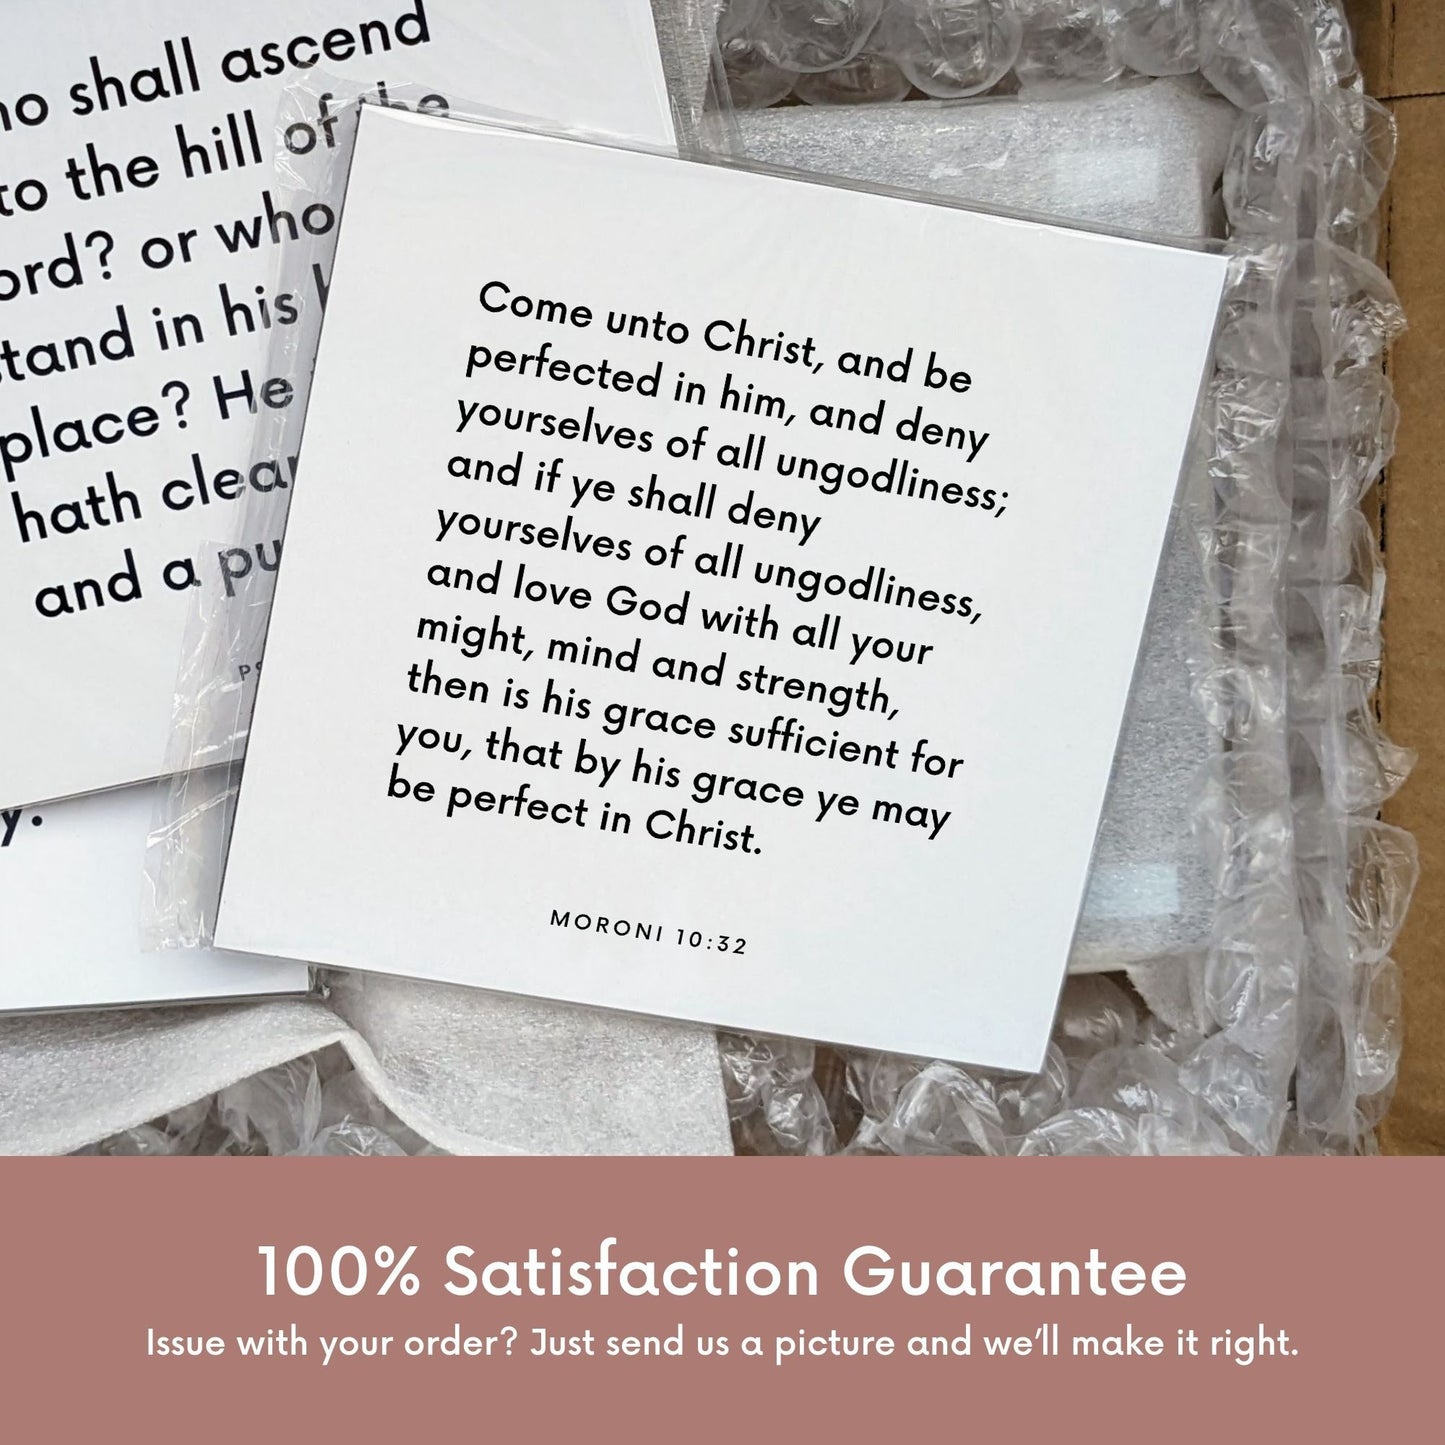 Shipping materials for scripture tile of Moroni 10:32 - "Come unto Christ, and be perfected in him"